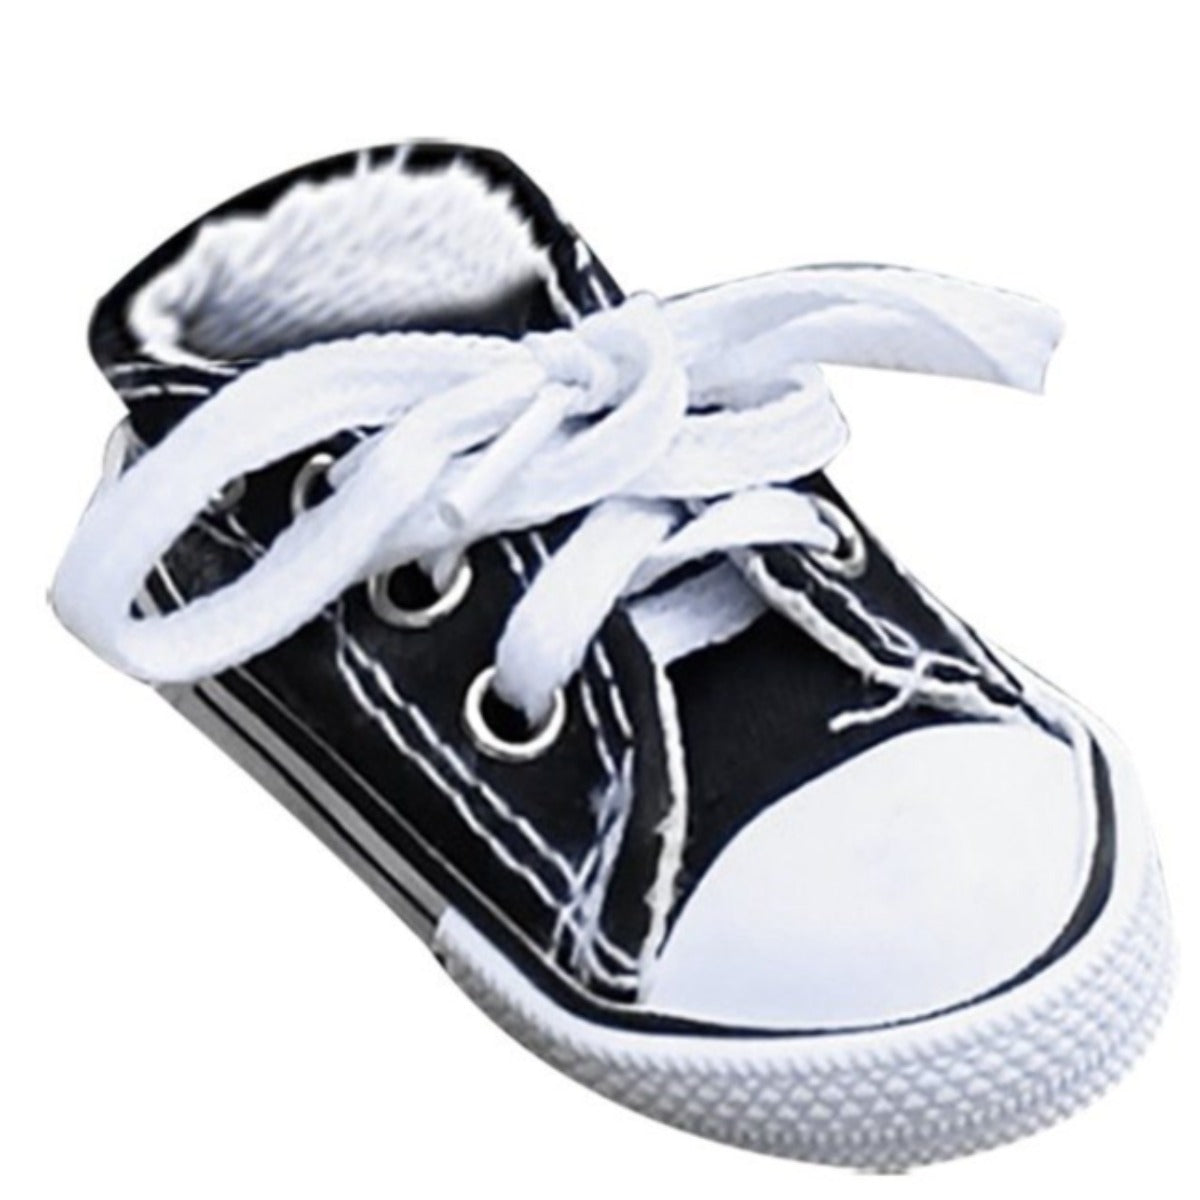 A pair of black and white Motorcycle Foot Support Shoes with shoelaces on a white background.